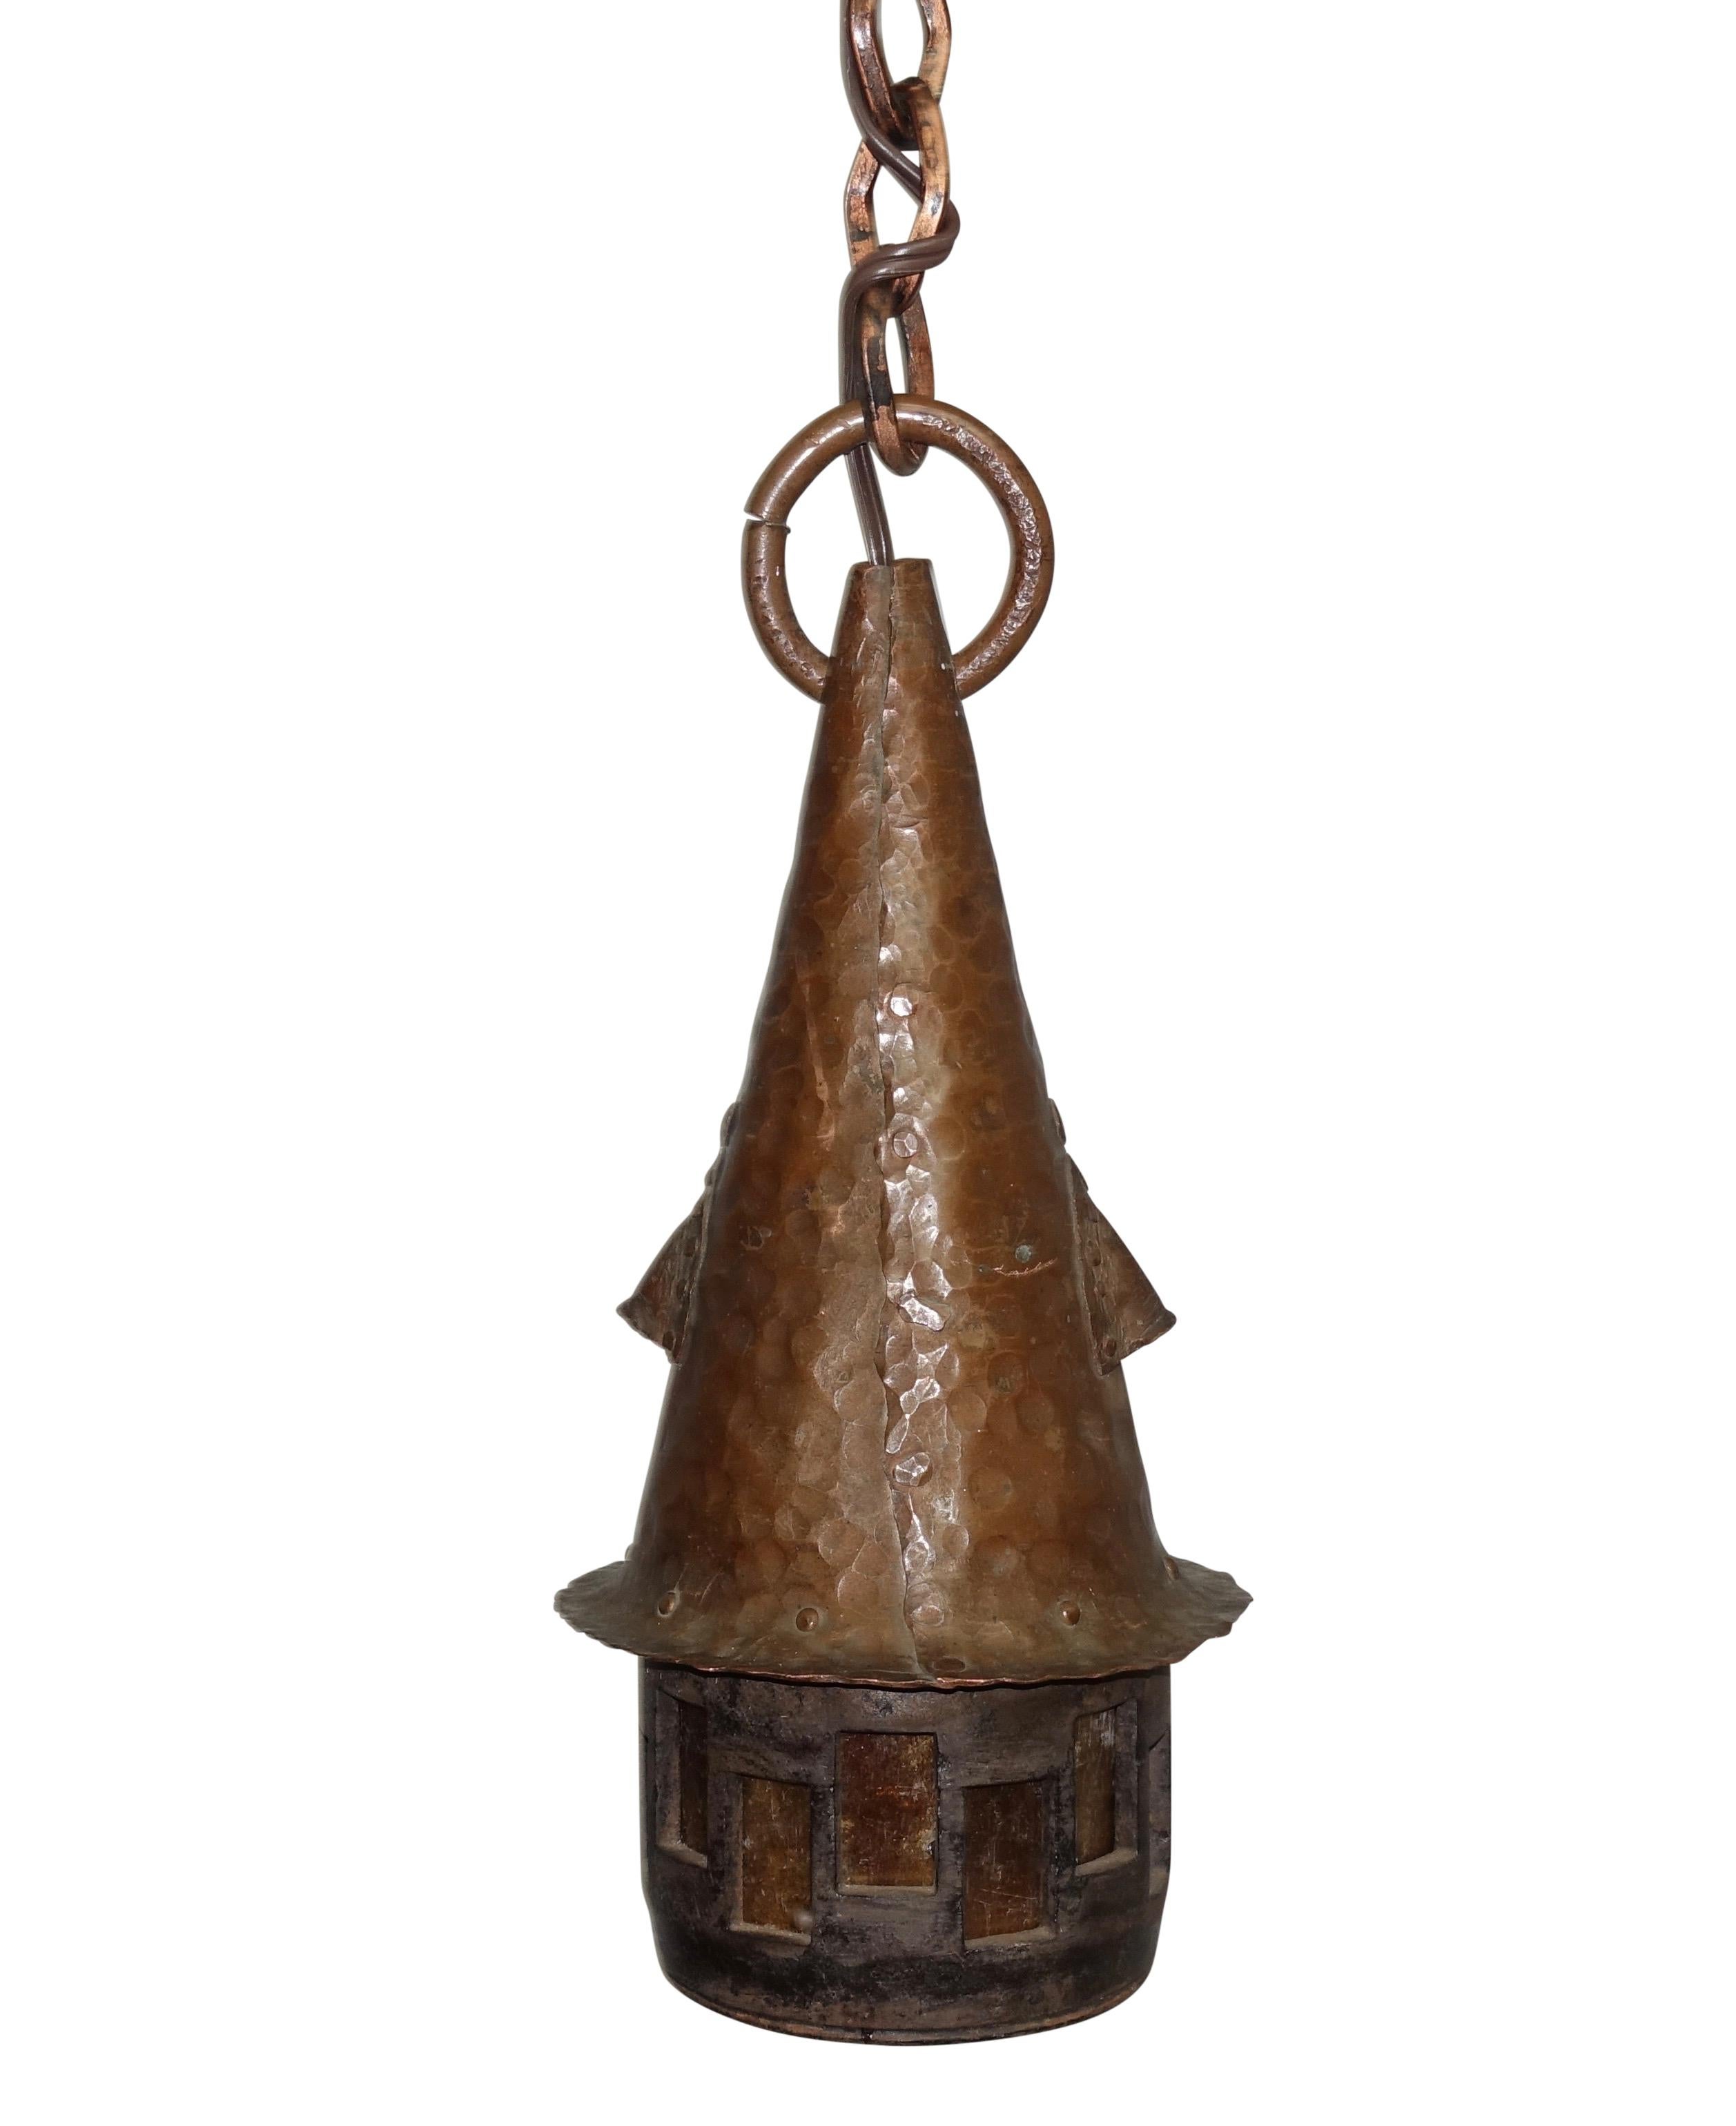 Prairie School style hand-hammered copper lantern with slag glass cutouts, copper chain and canopy. Recently, re-wired, American, circa 1930.
Measurements include canopy and chain.